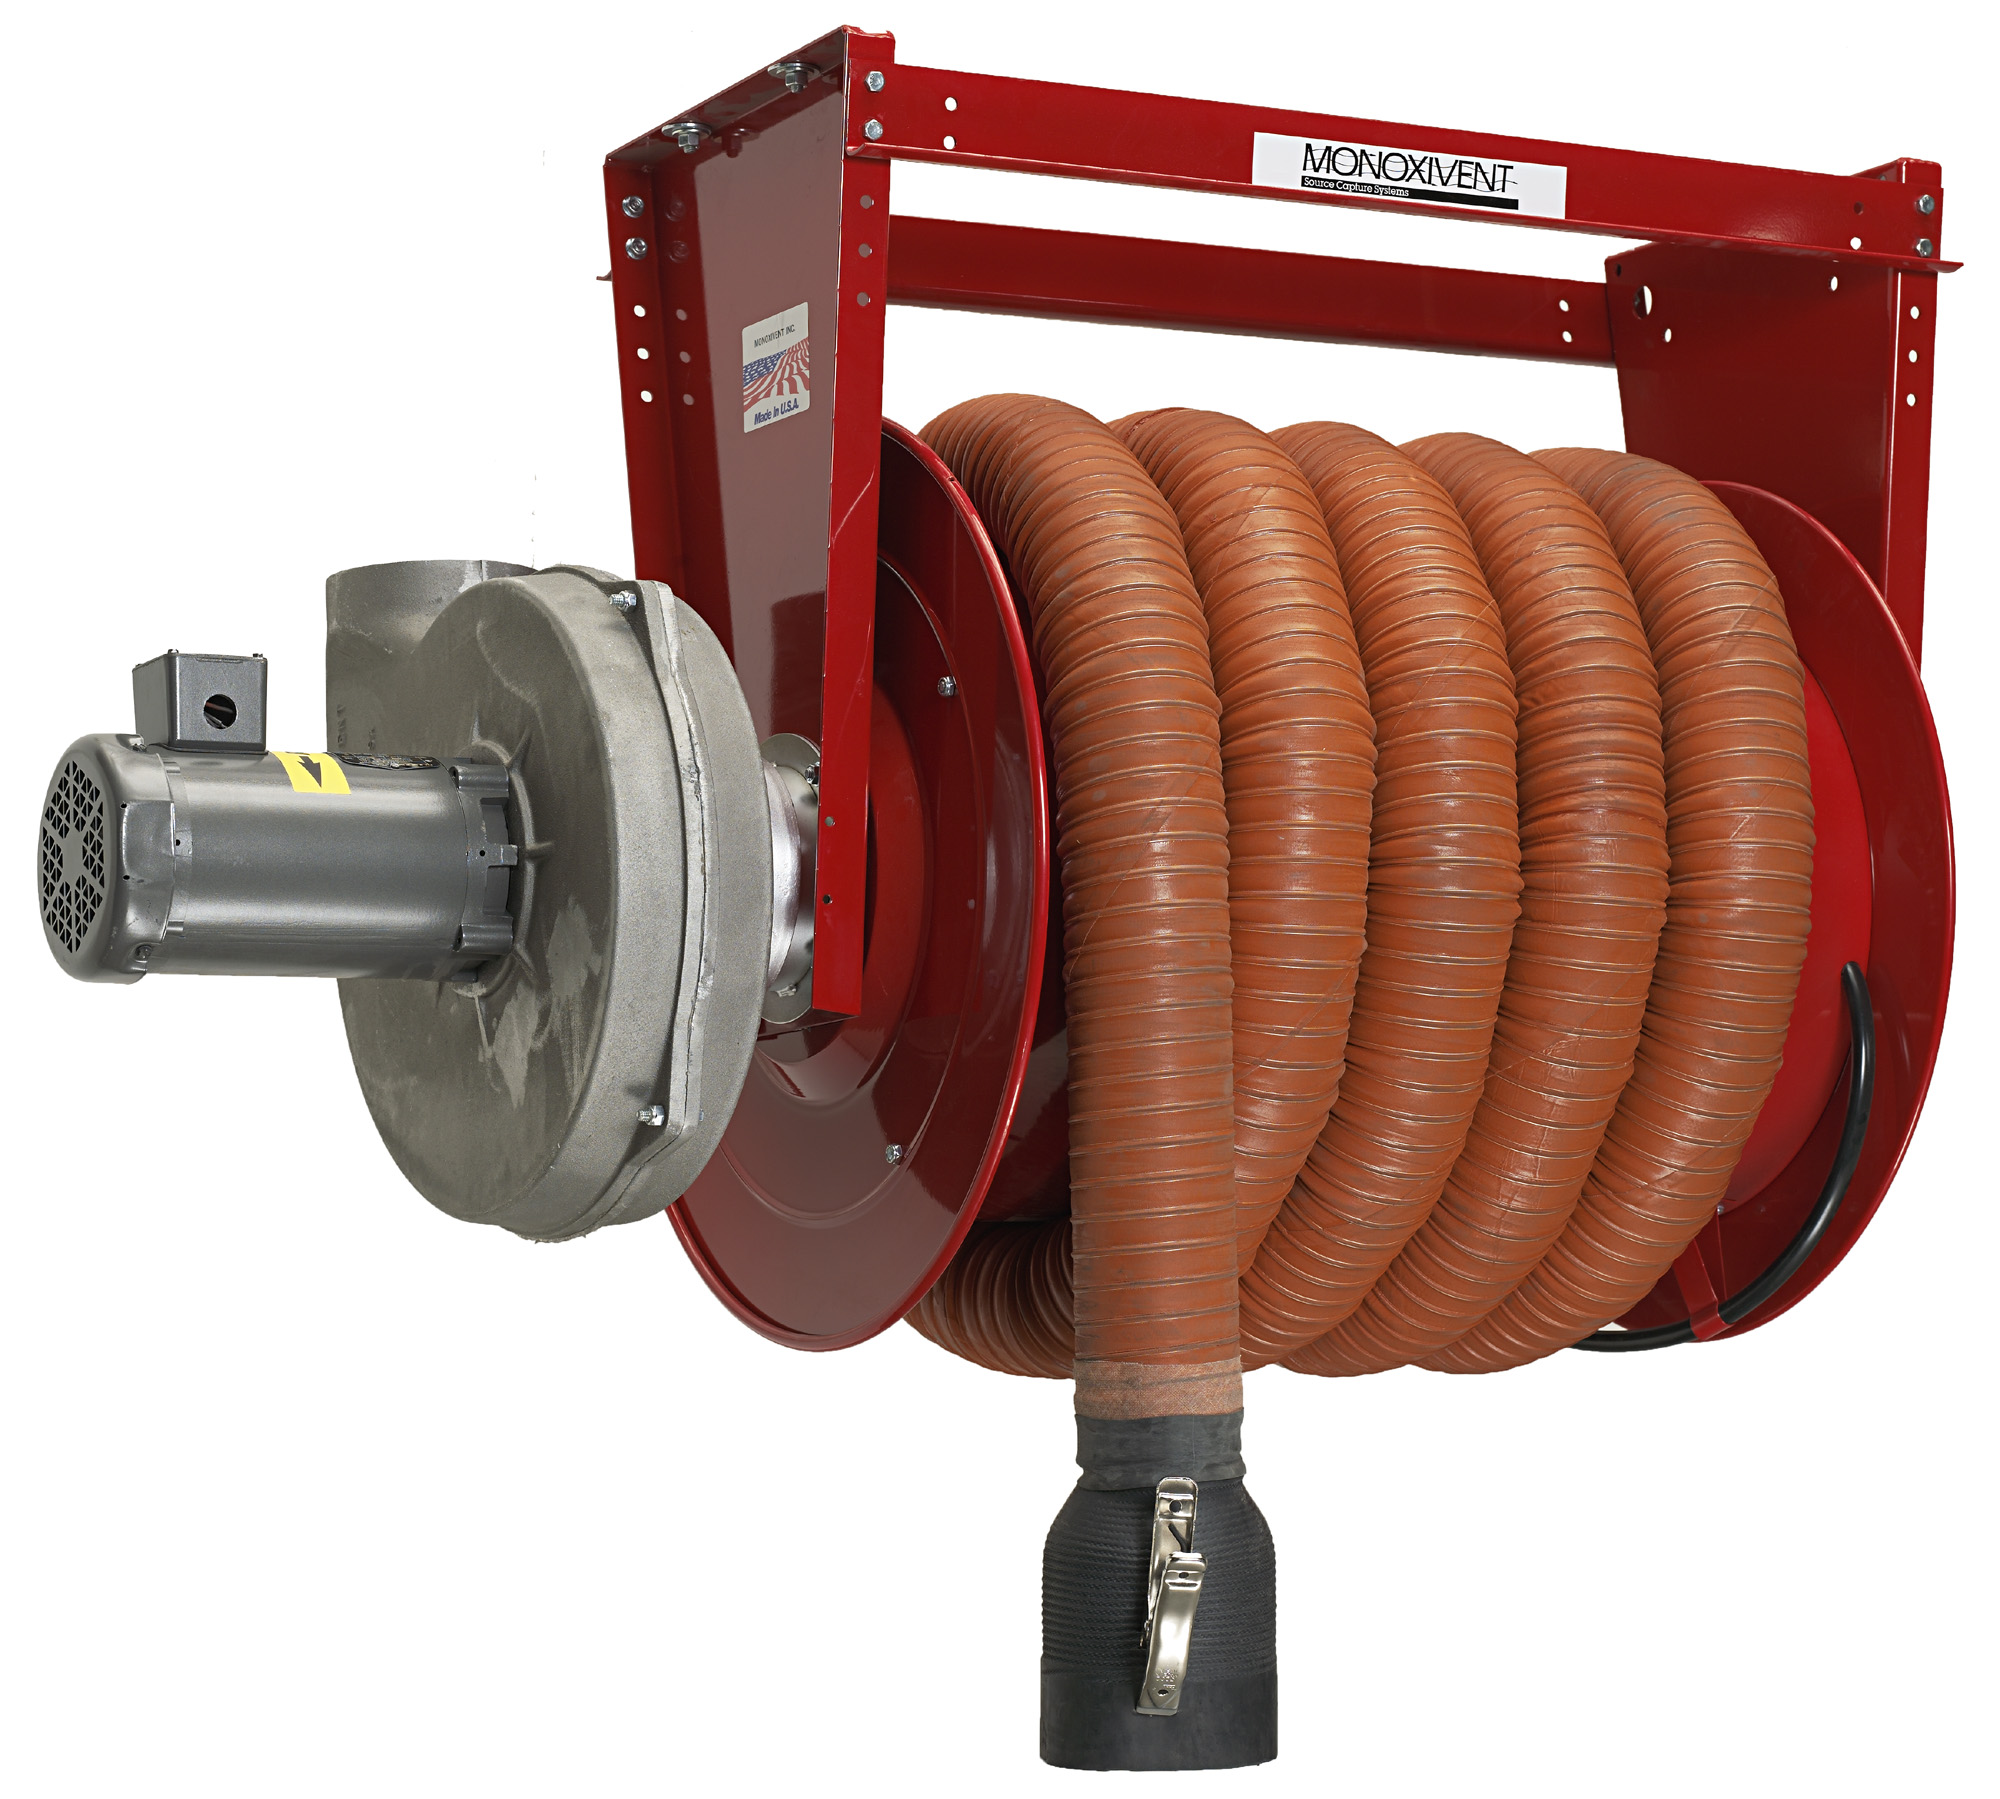 Monoxivent › Spring Operated Hose Reels